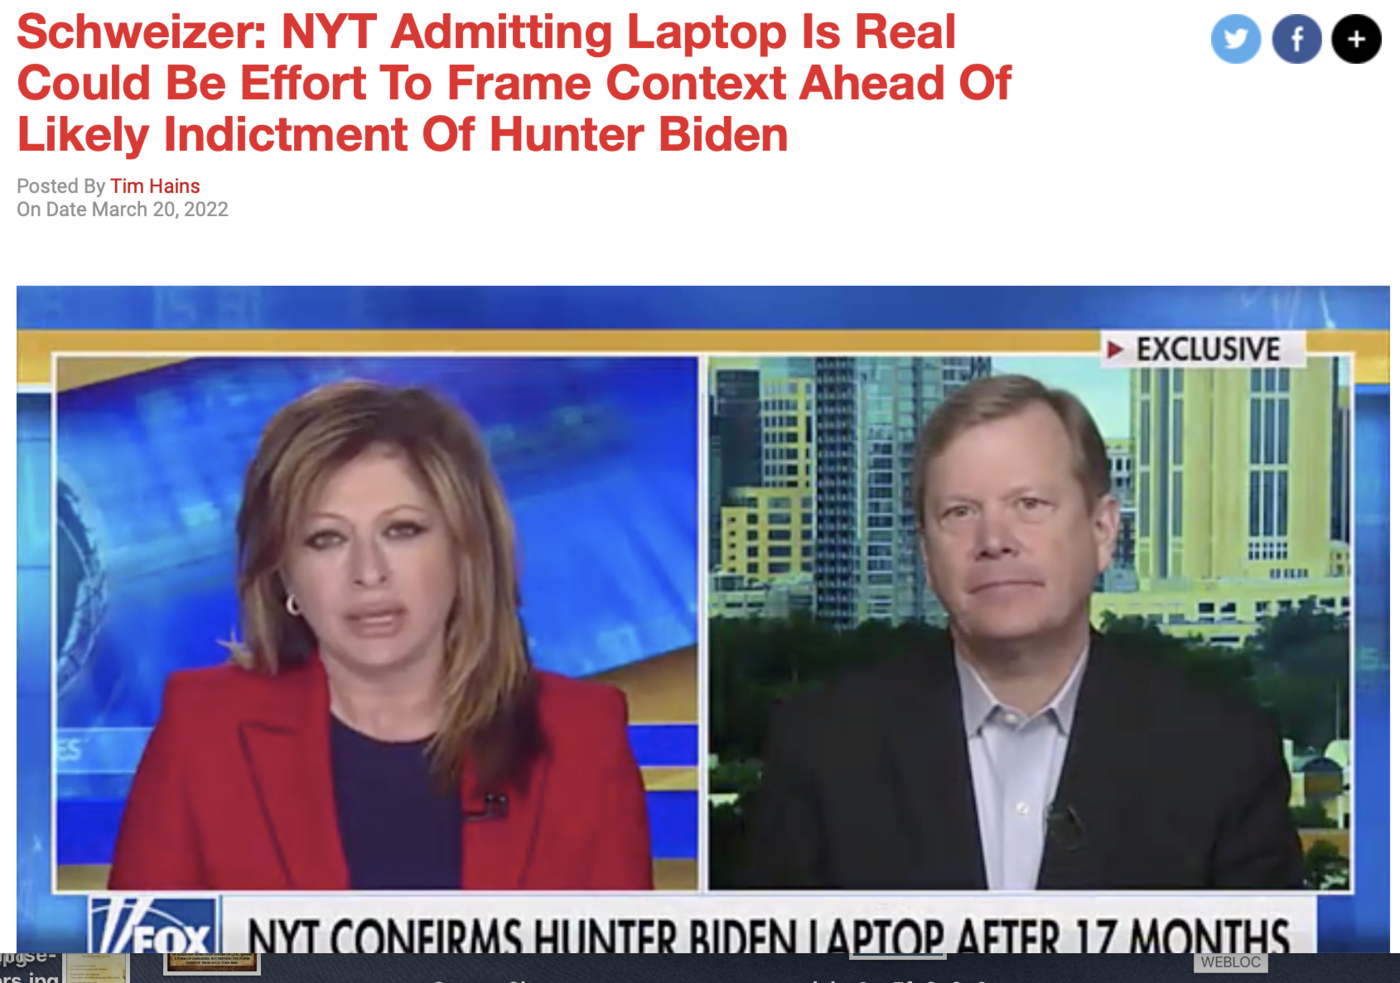 schweizer-nyt-admitting-laptop-is-real-could-be-effort-to-frame